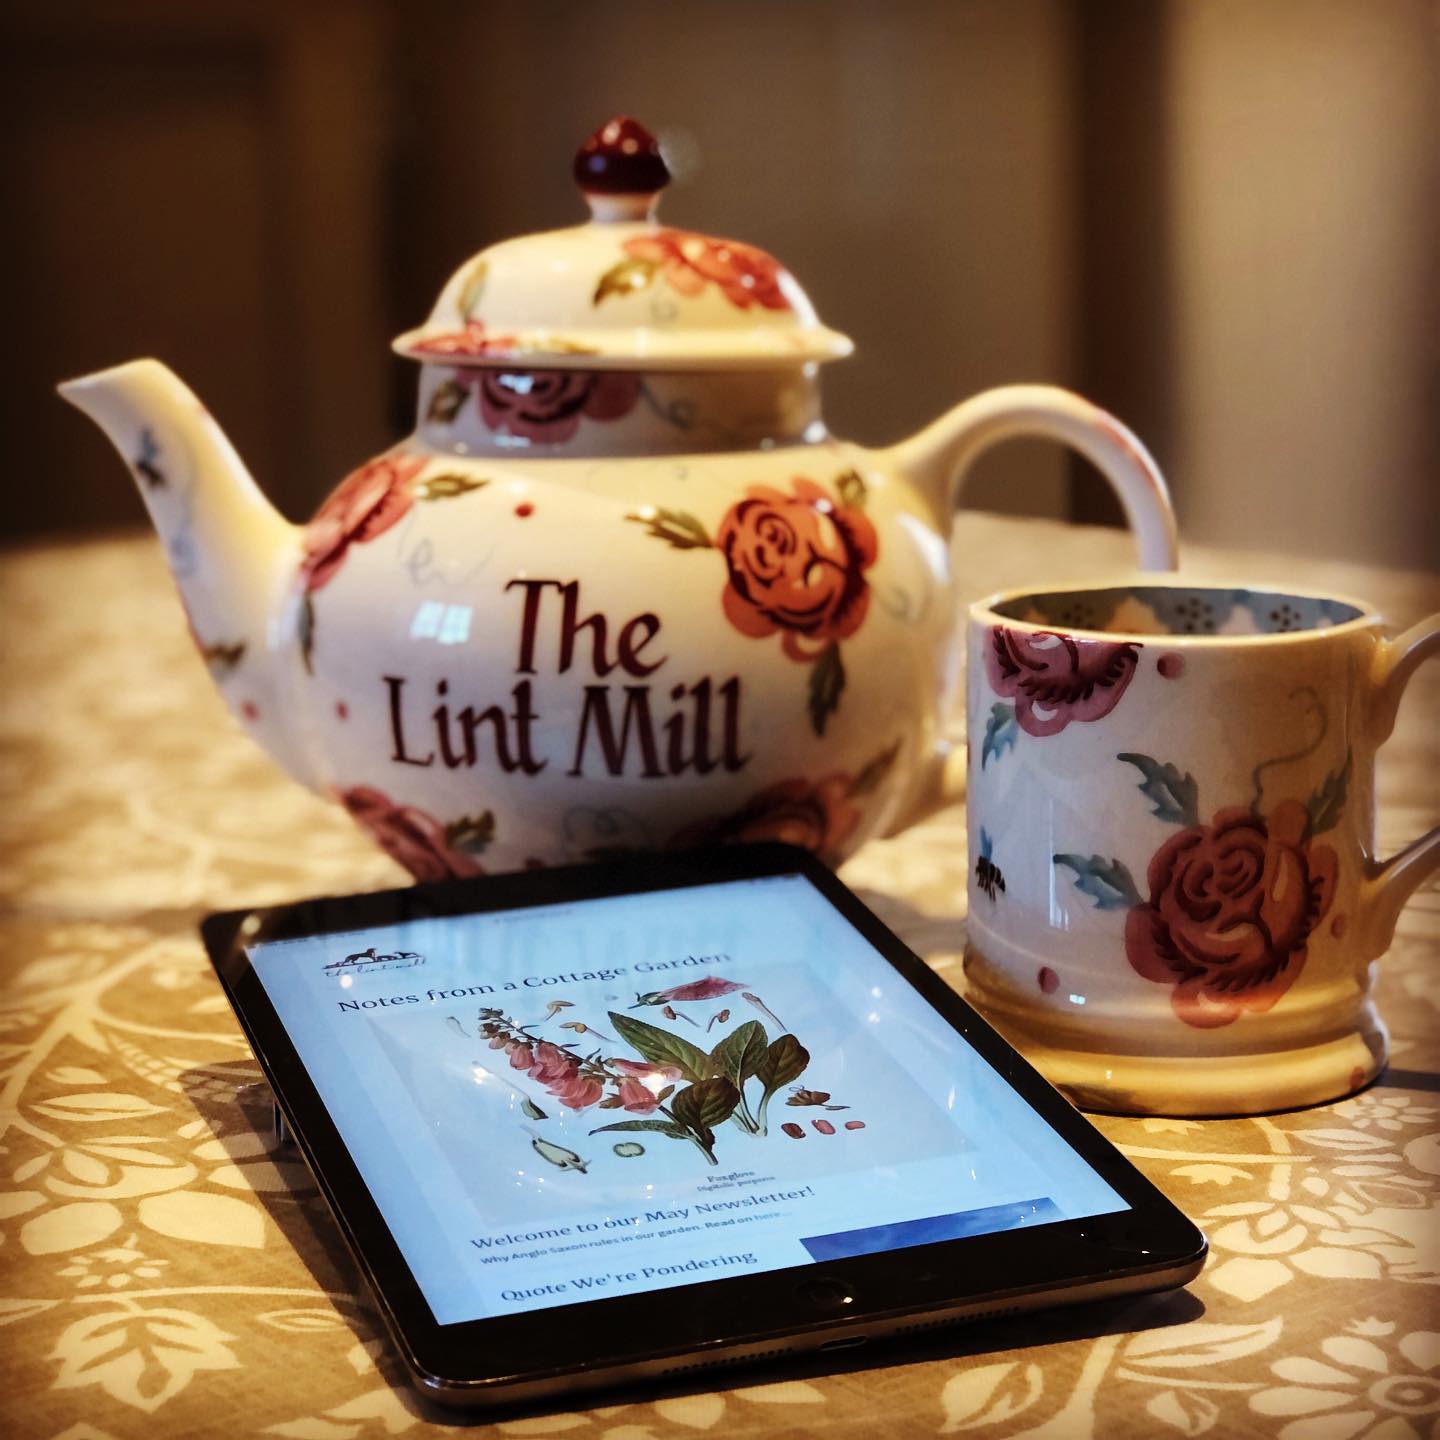 Our monthly newsletter comes out tomorrow. So plan to put the kettle on and have 10 minutes with us at The Lint Mill 😊 #relax #toptips #recipes #books #inspiration